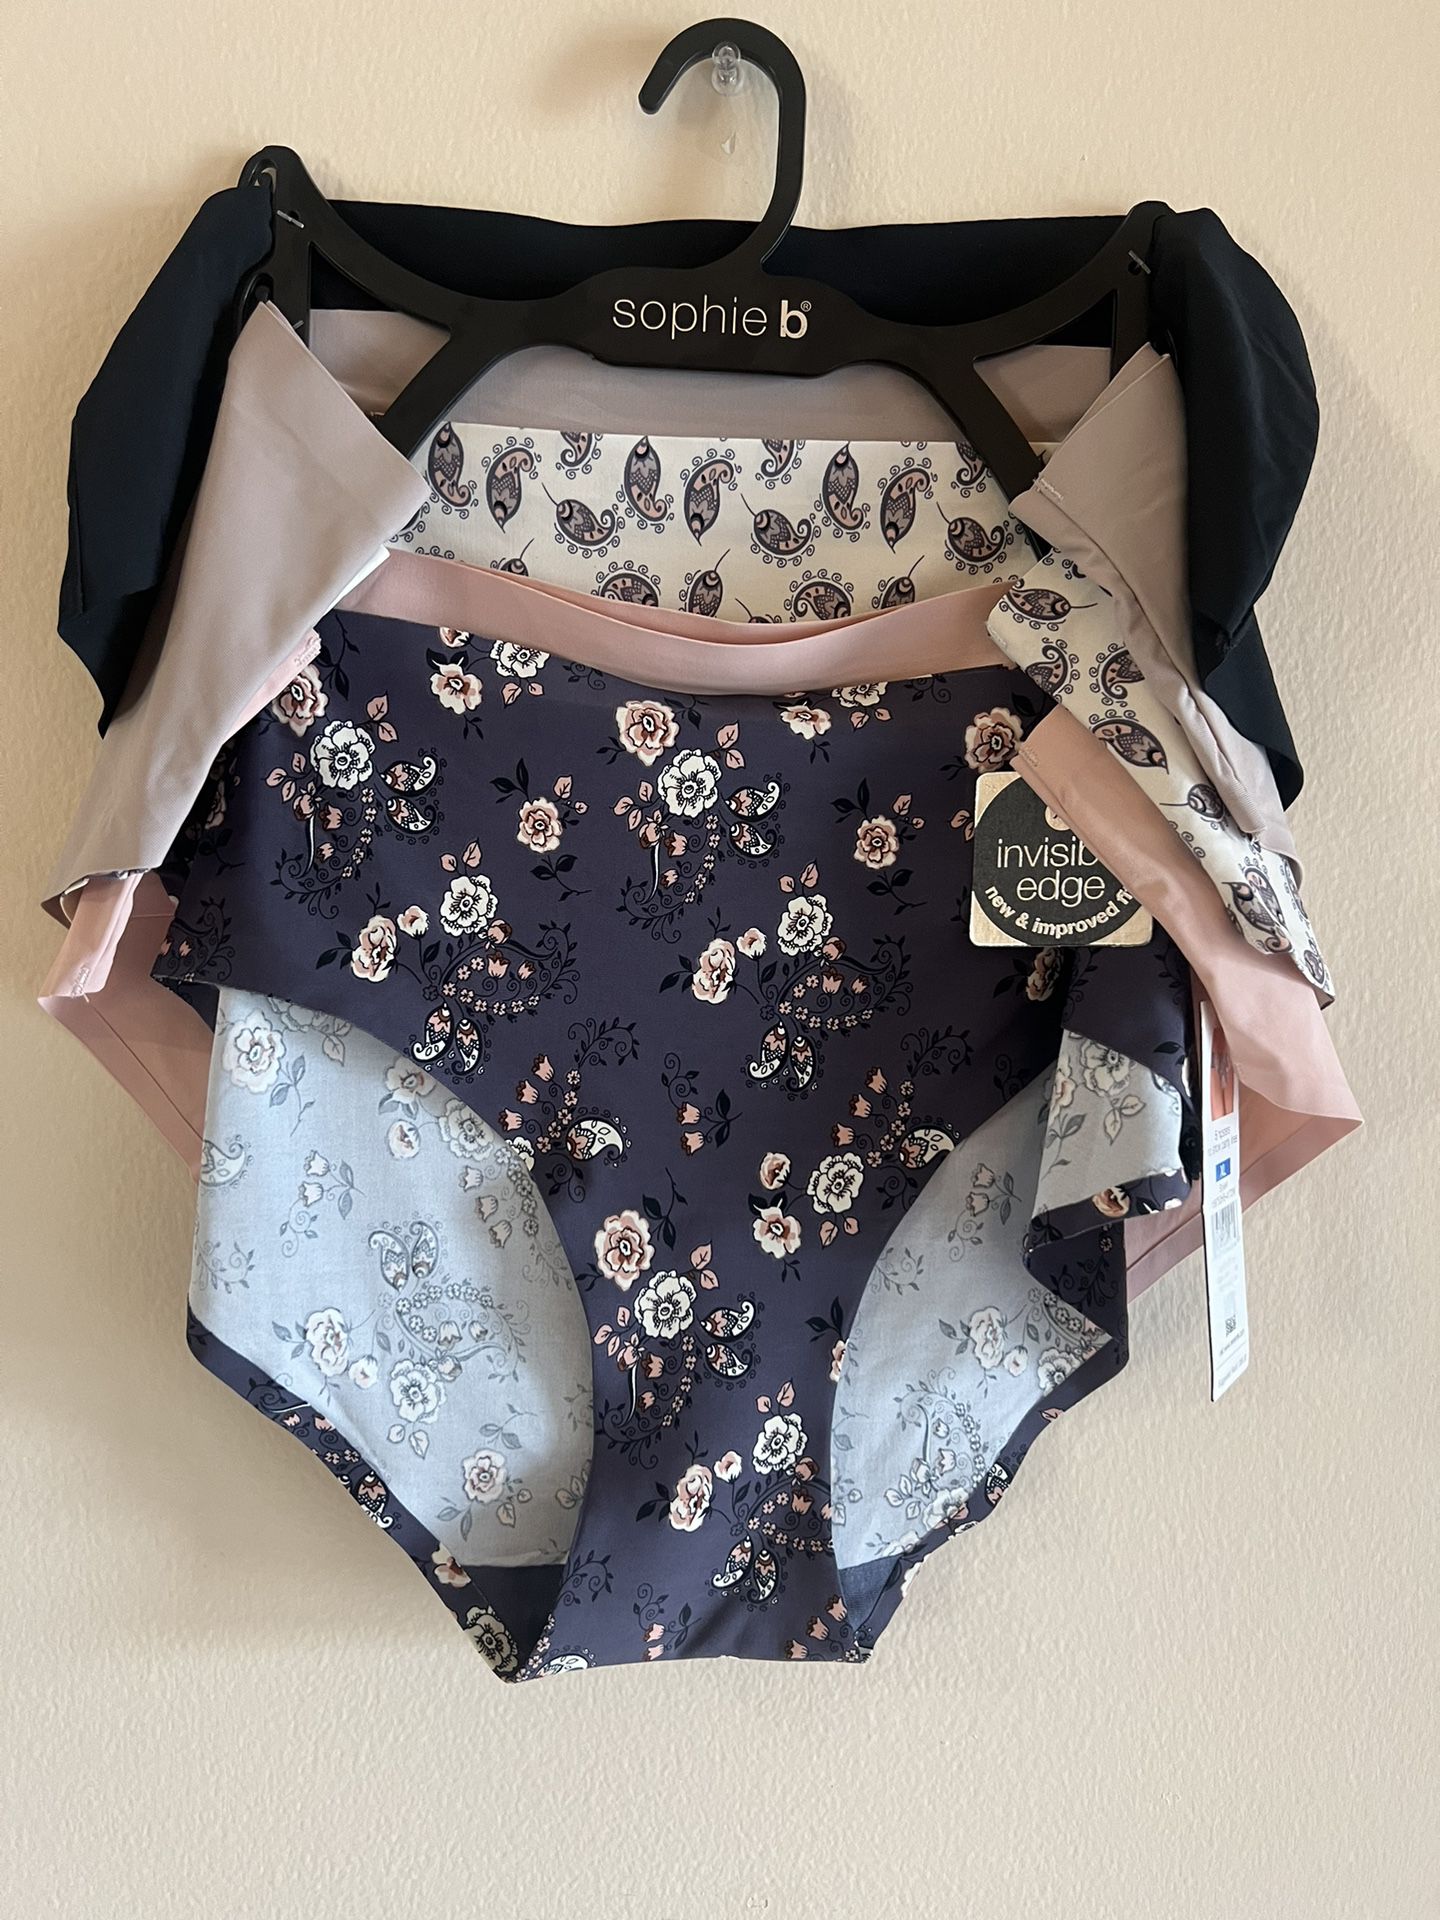 Sophie b 5 Pack Hipsters No Show Panty Lines/XL/nwt